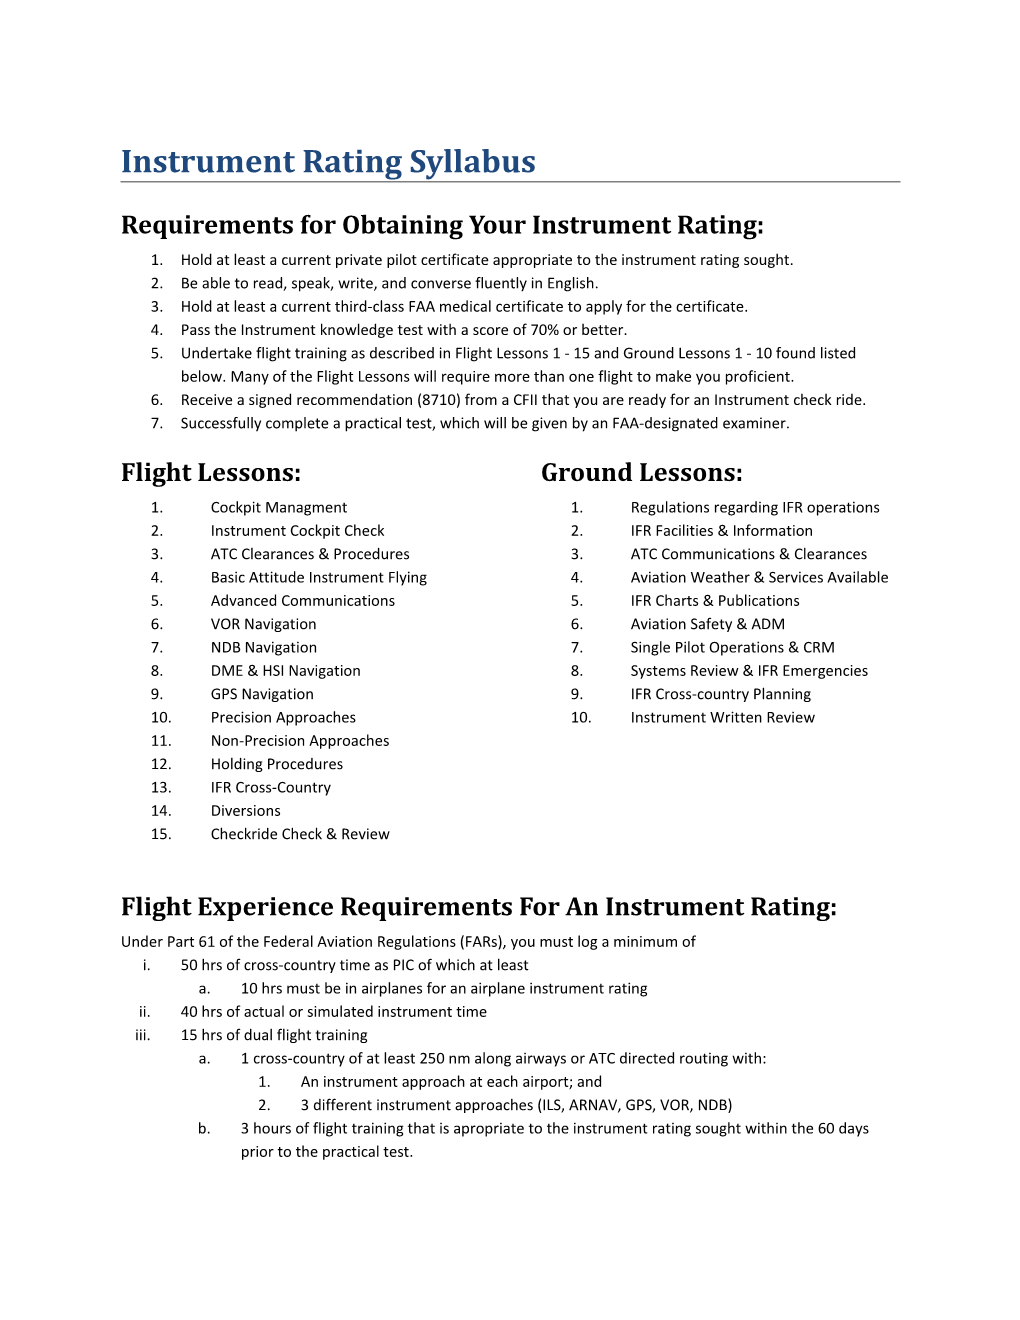 Requirements for Obtaining Your Instrument Rating